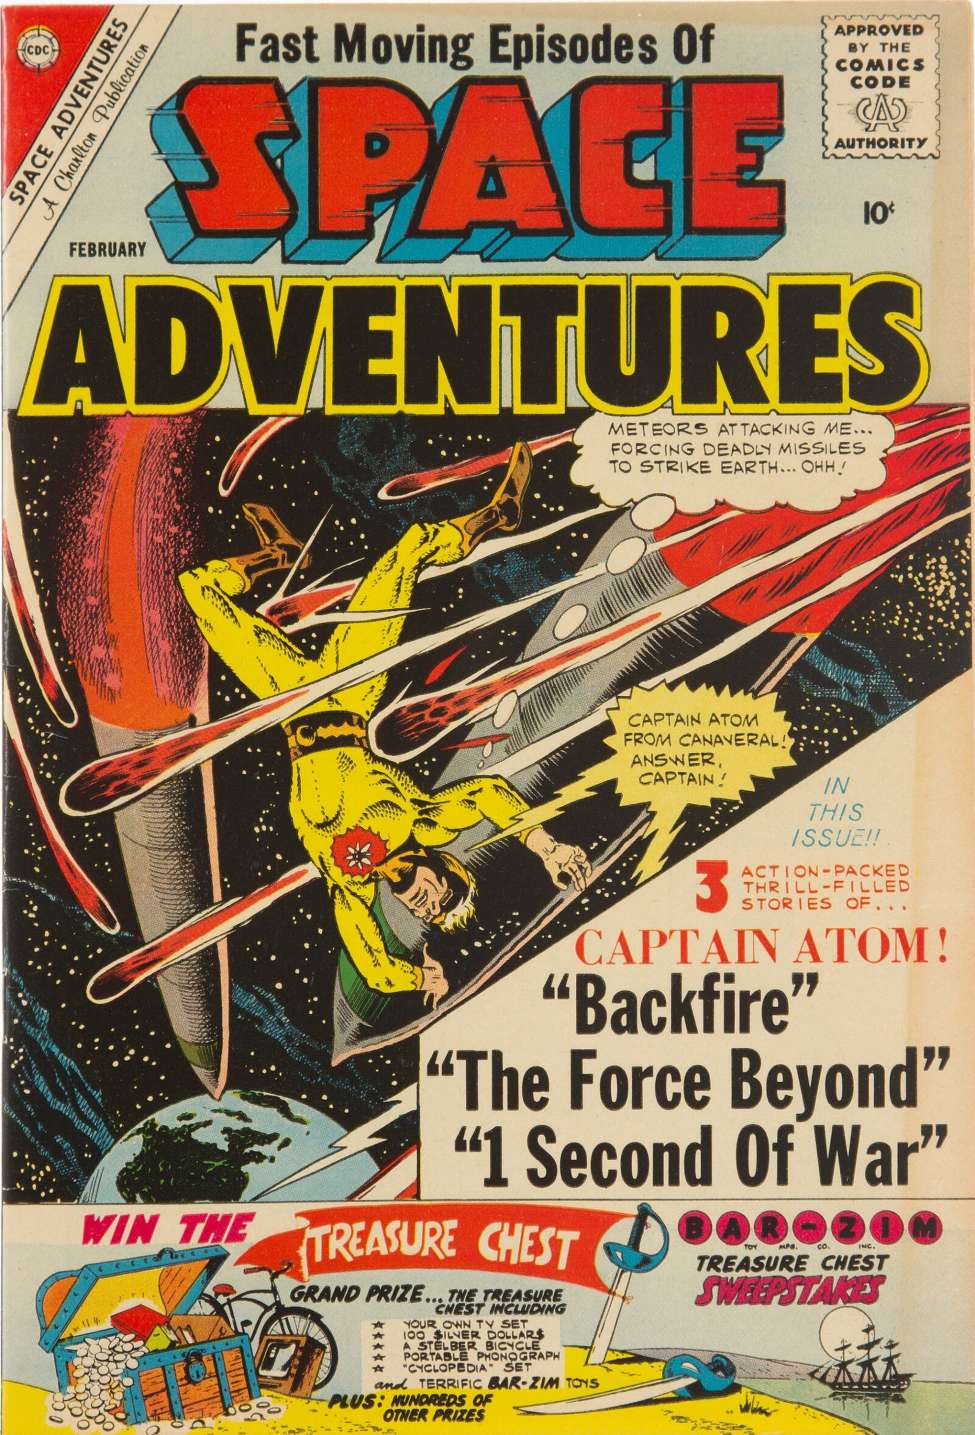 Book Cover For Space Adventures 38 - Version 2